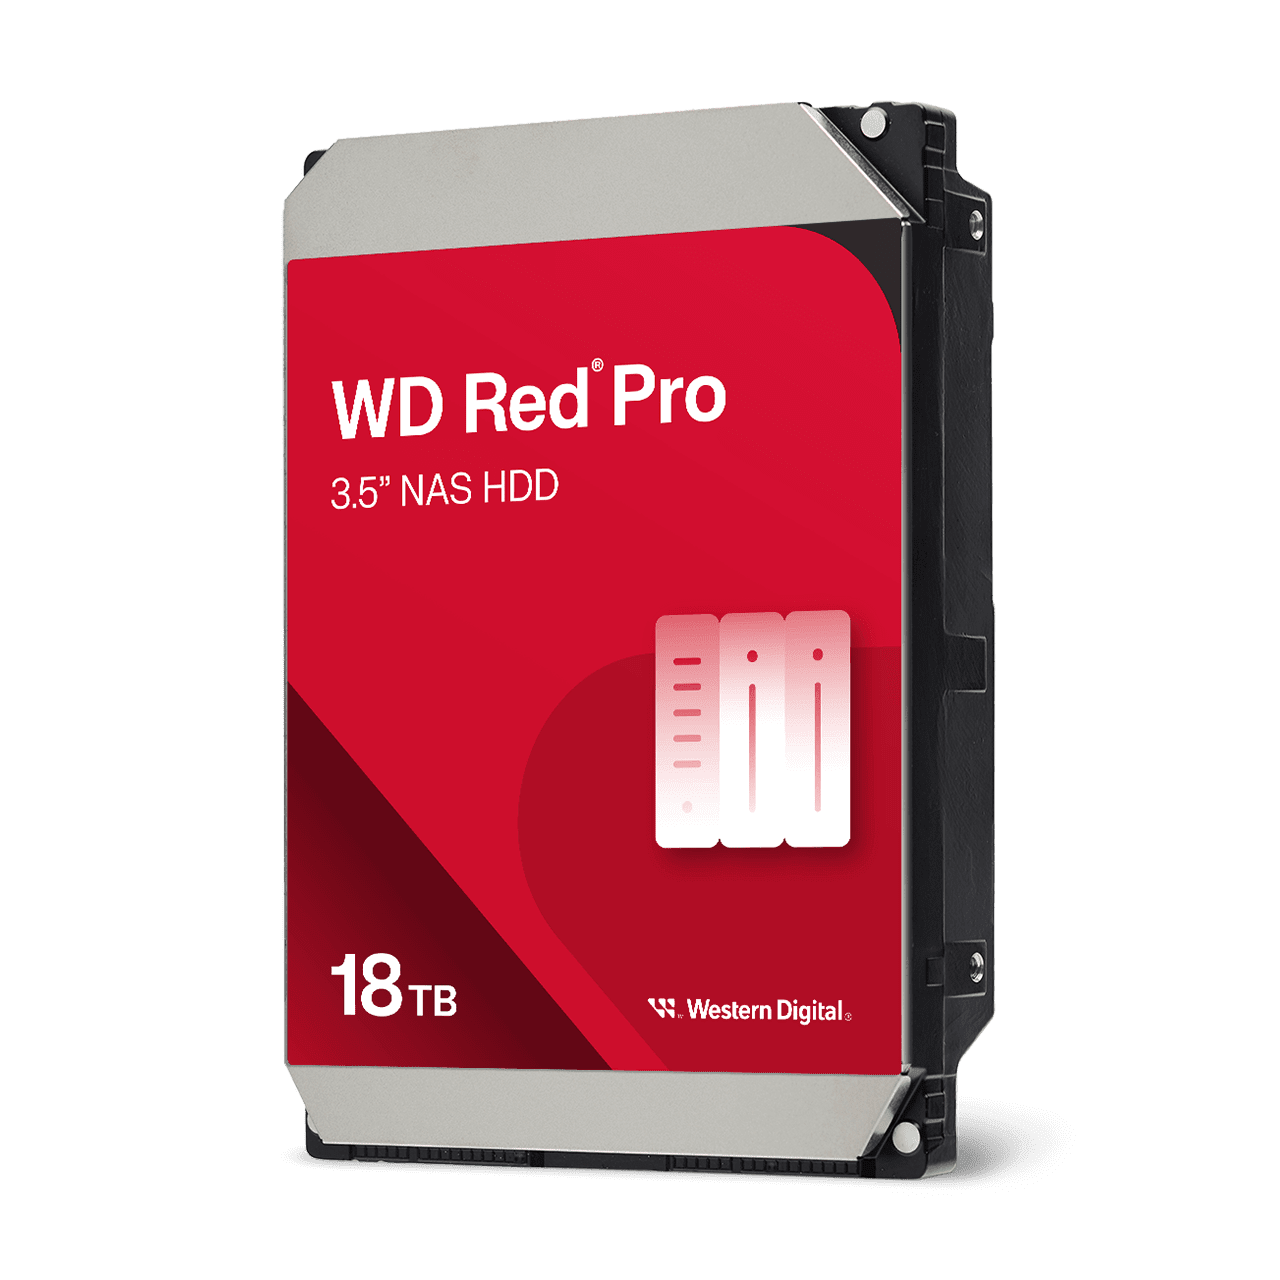 WD Red™ Pro 18TB NAS Hard Drive - Image9